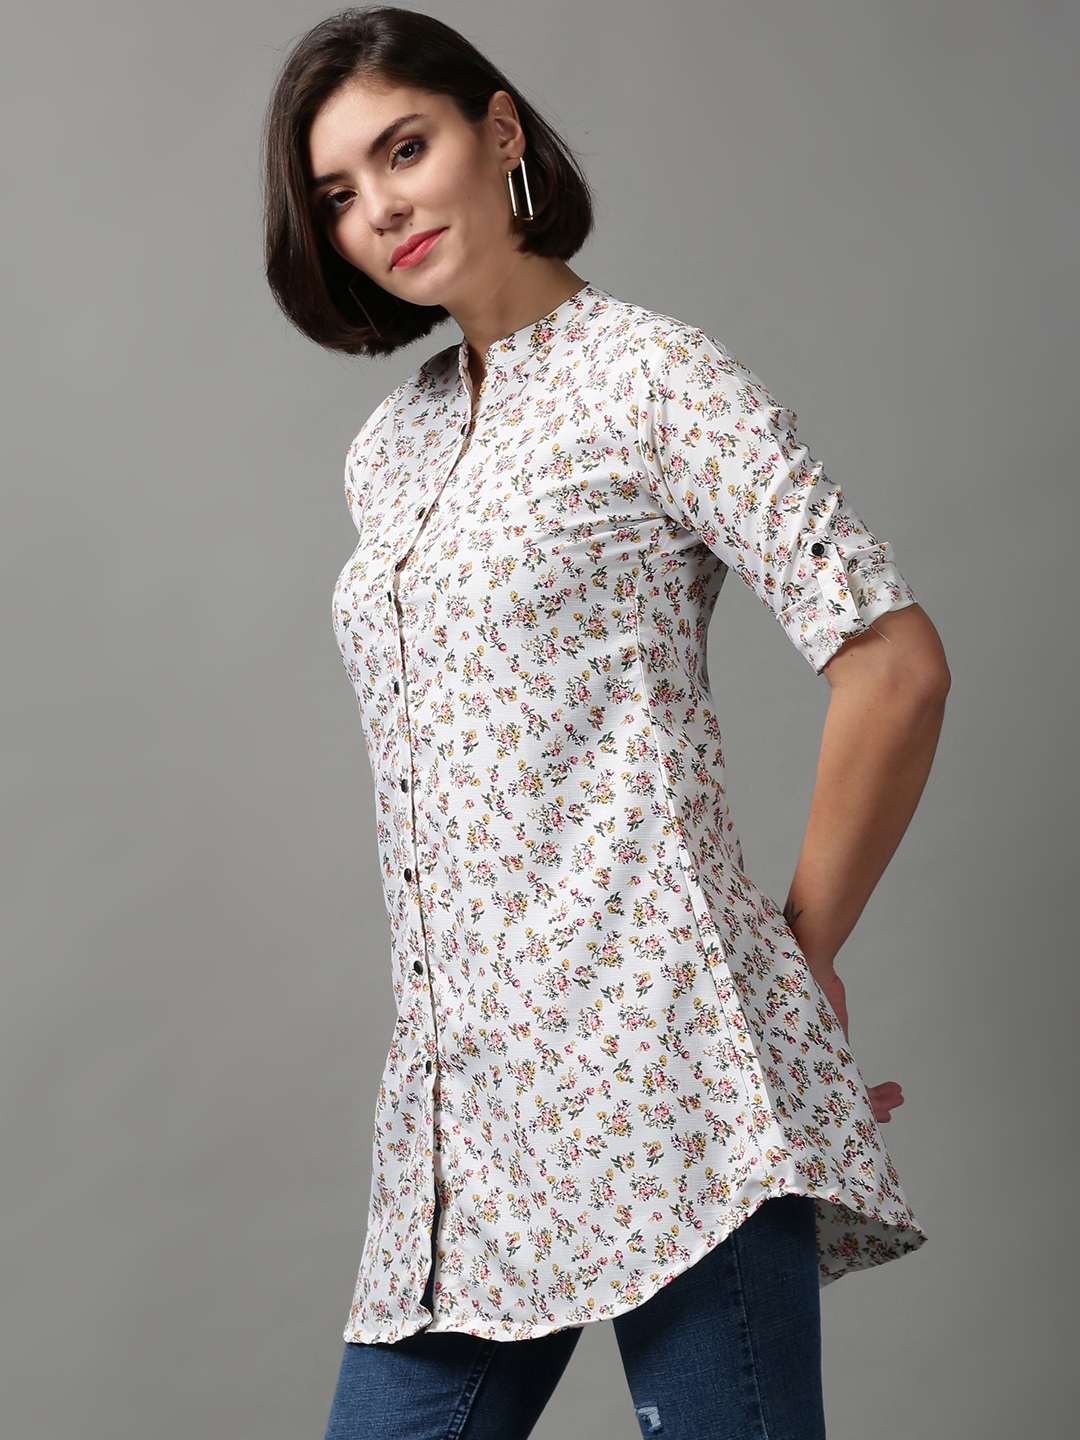 Women's White Polyester Printed Casual Shirts